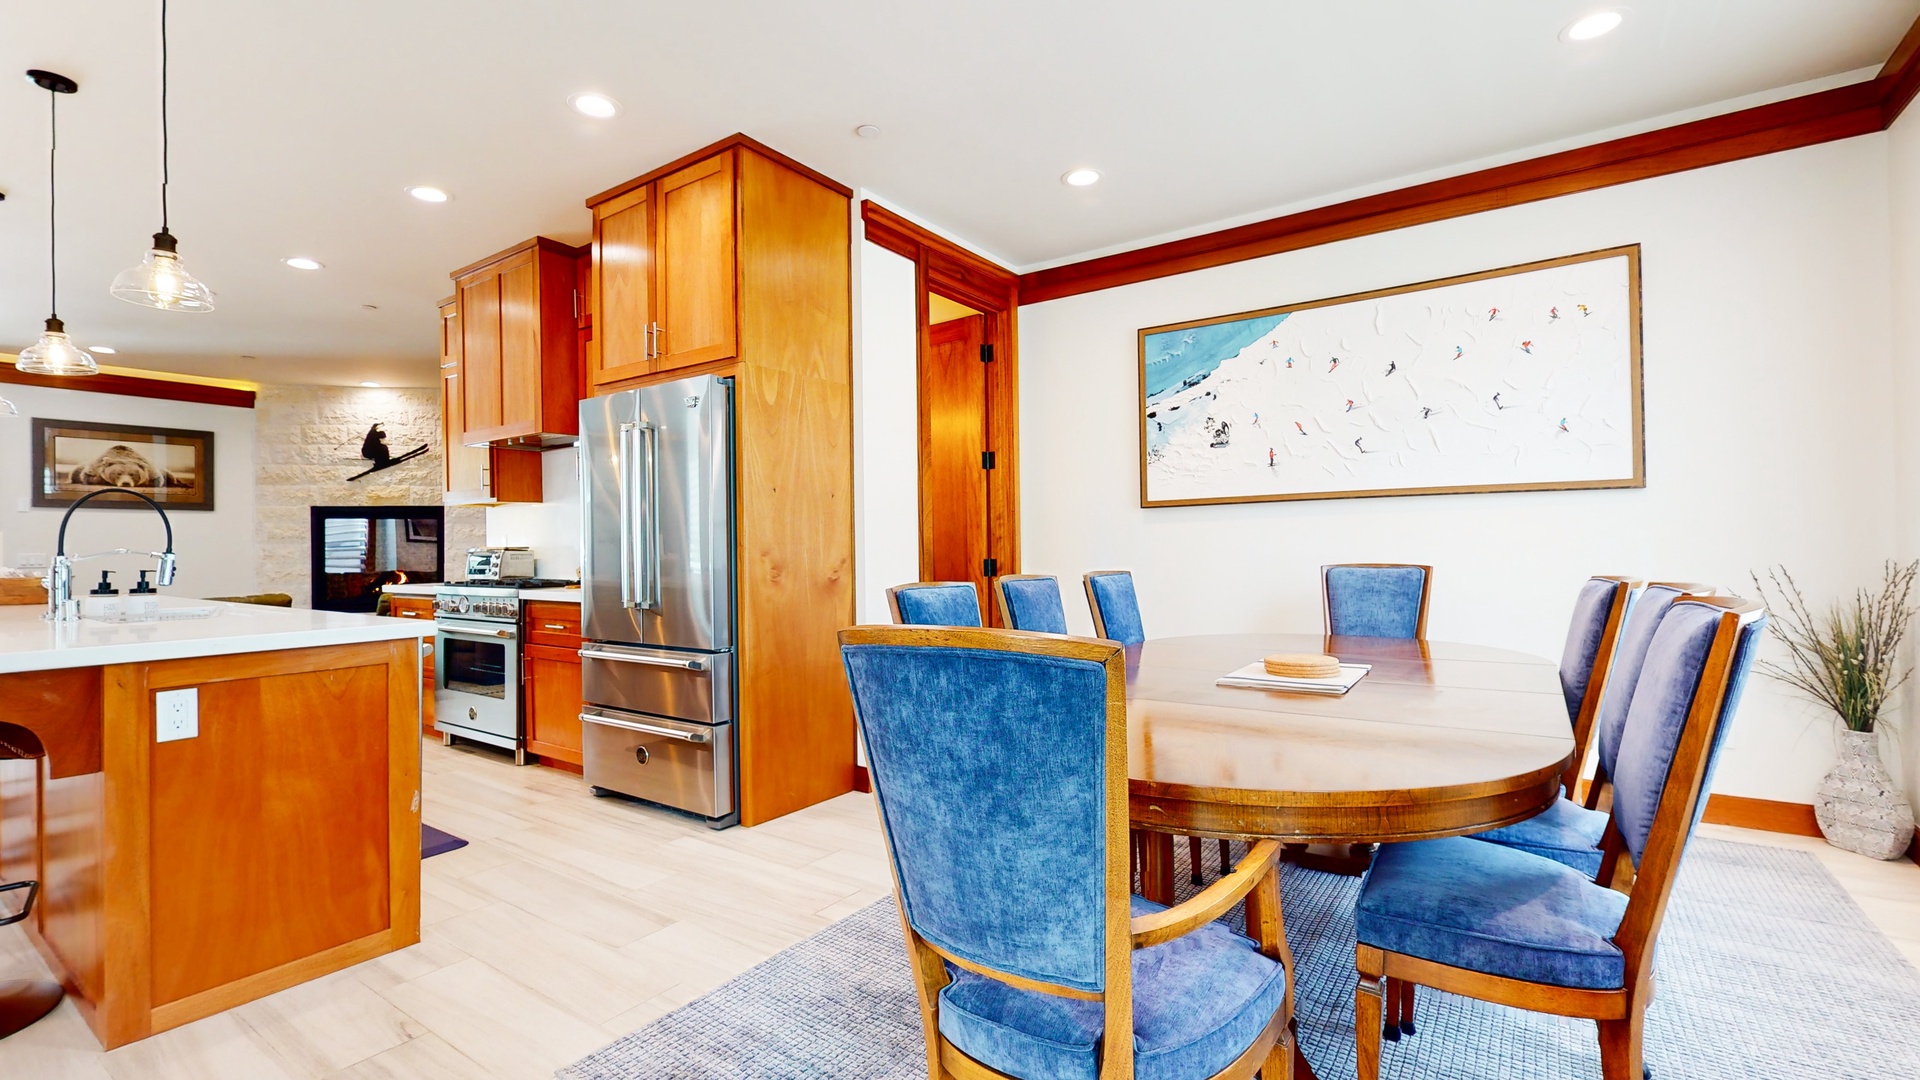 Enjoy the open flow from the kitchen to the dining room, offering seating for 8